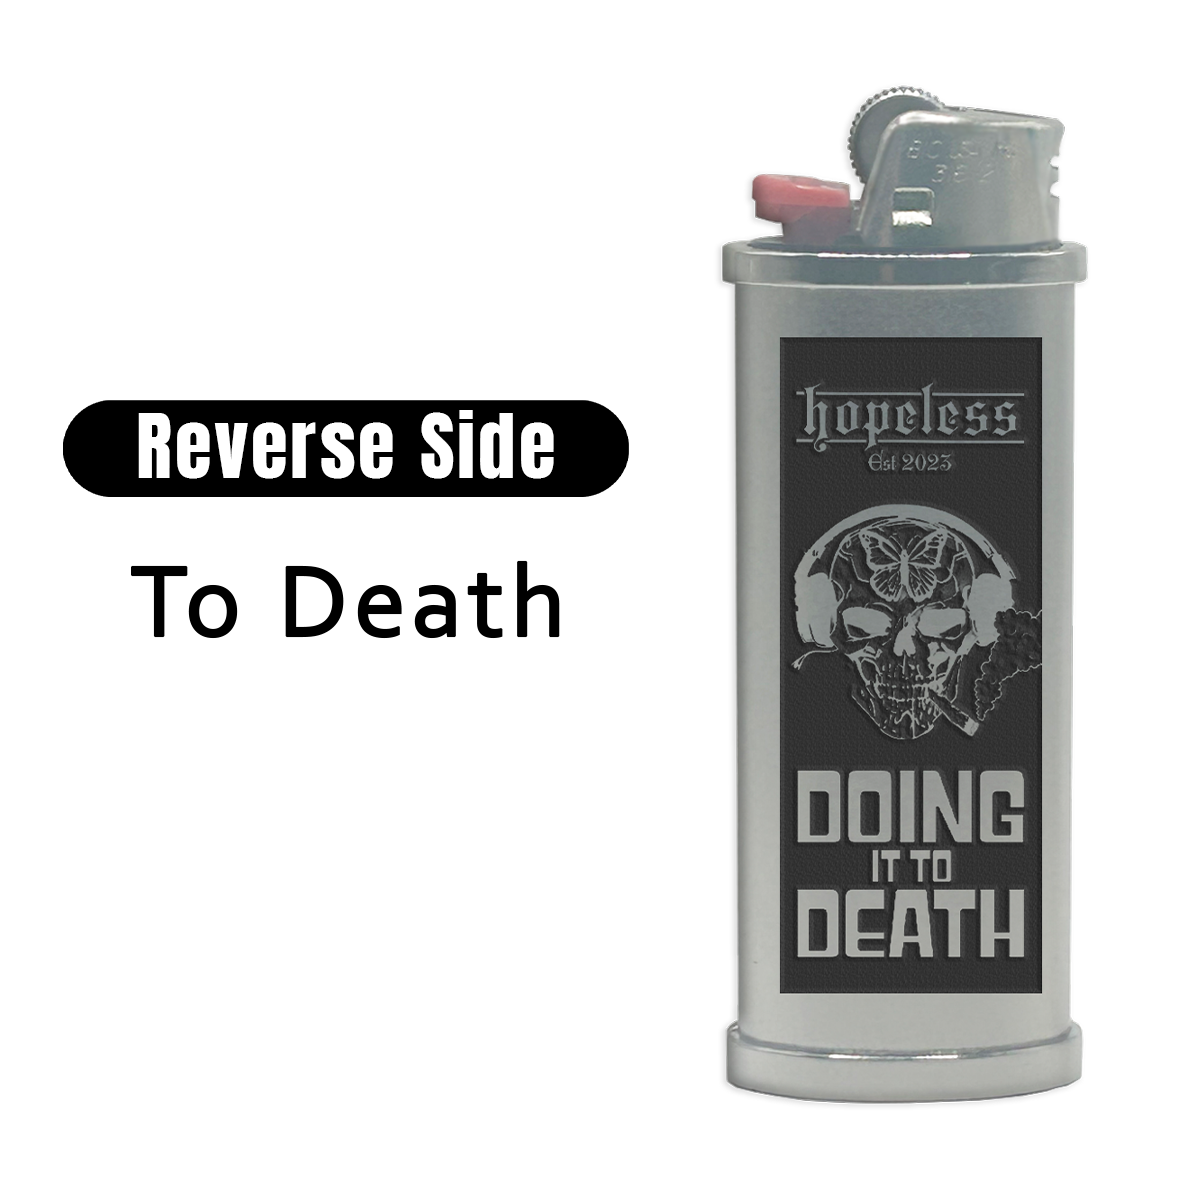 No Time to Die Engraved Lighter